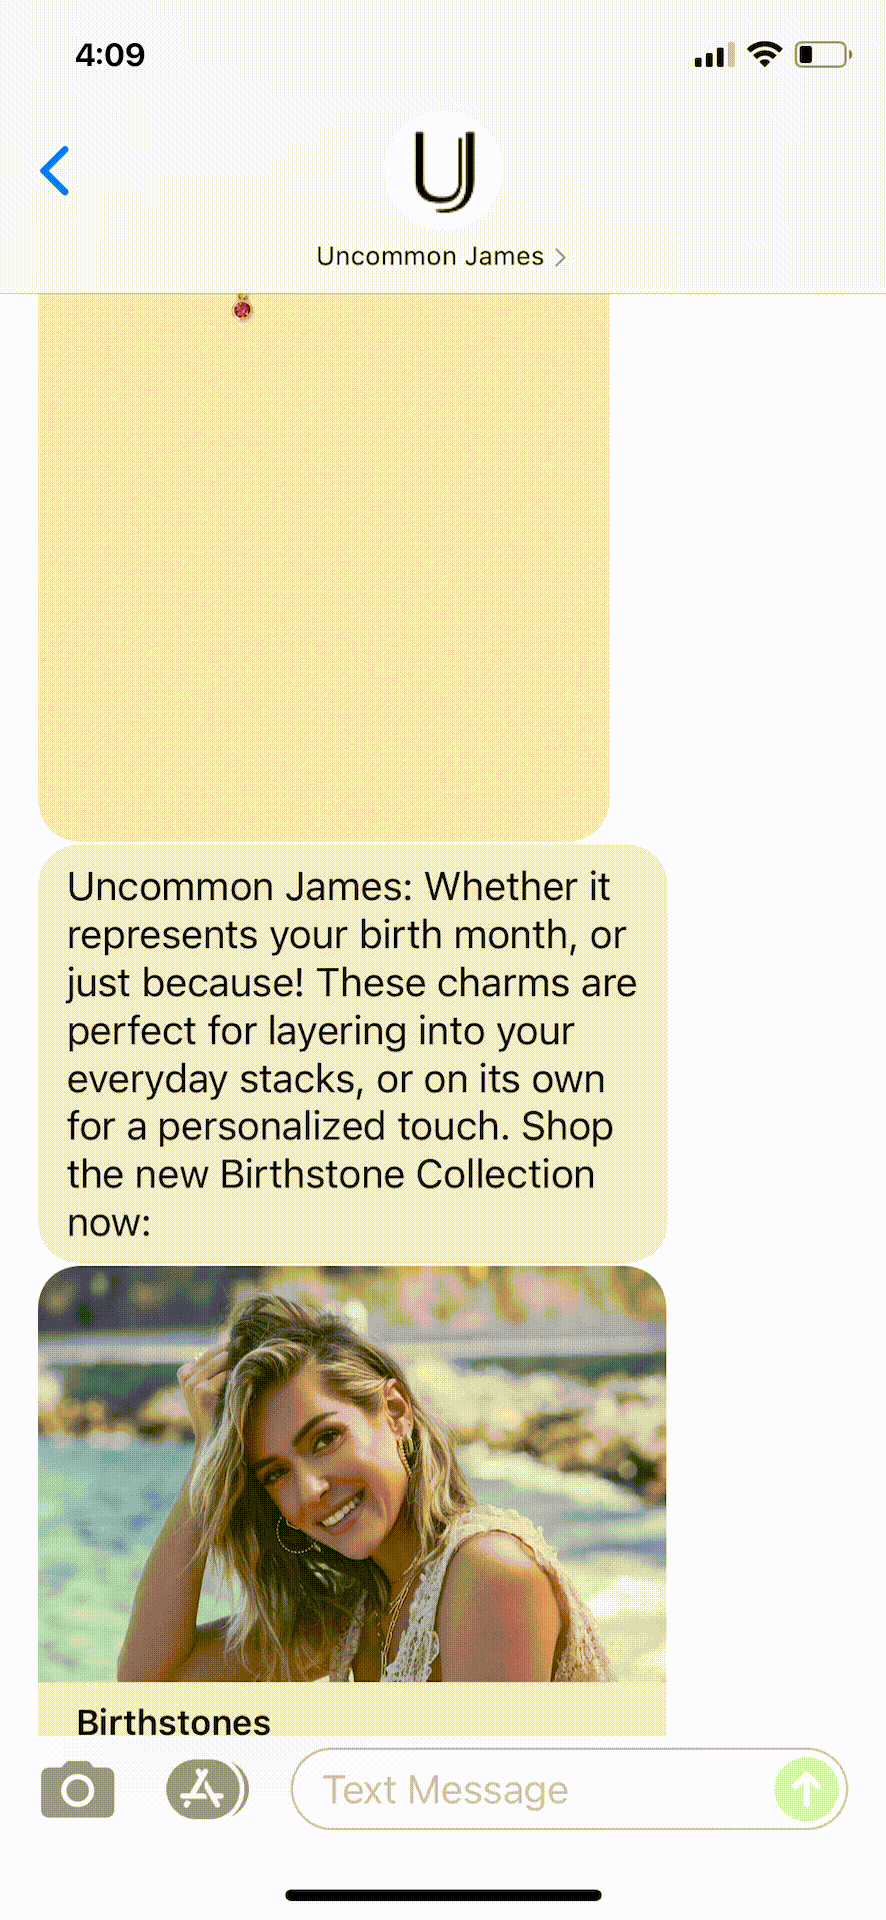 Uncommon-James-Text-Message-Marketing-Example-10.12.2021